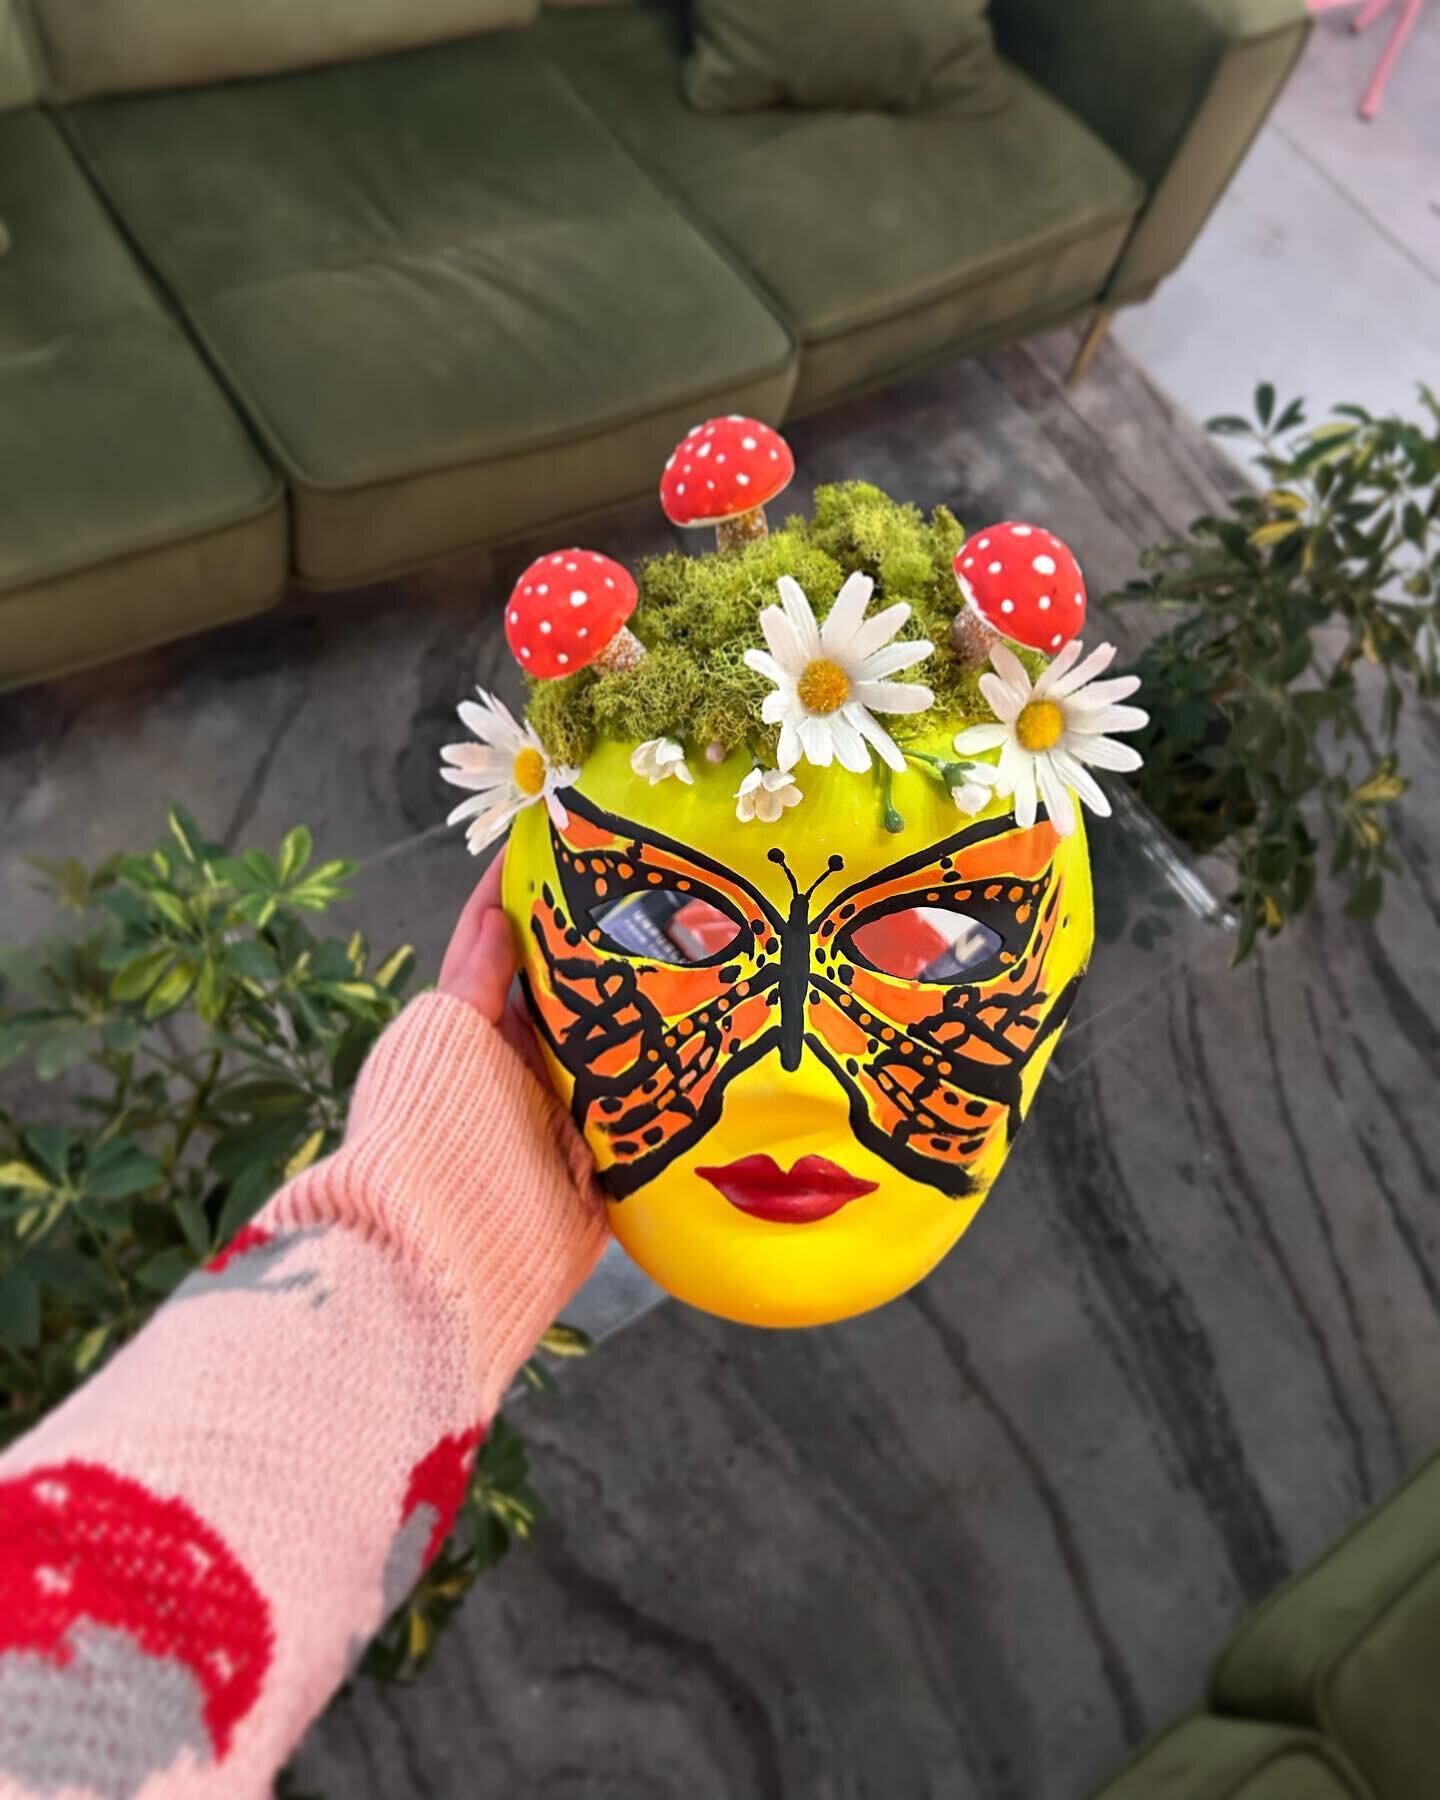 Mindy&rsquo;s butter fly mask fits the vibe! What&rsquo;s your favorite kind of butterfly?
Type 🦋if you love Dolly Parton!!!

#paintparty #paintparties #motherdaughterbusiness #womanownedbiz #artisforall #artisforeveryone #anyonecandoit  #paintingis